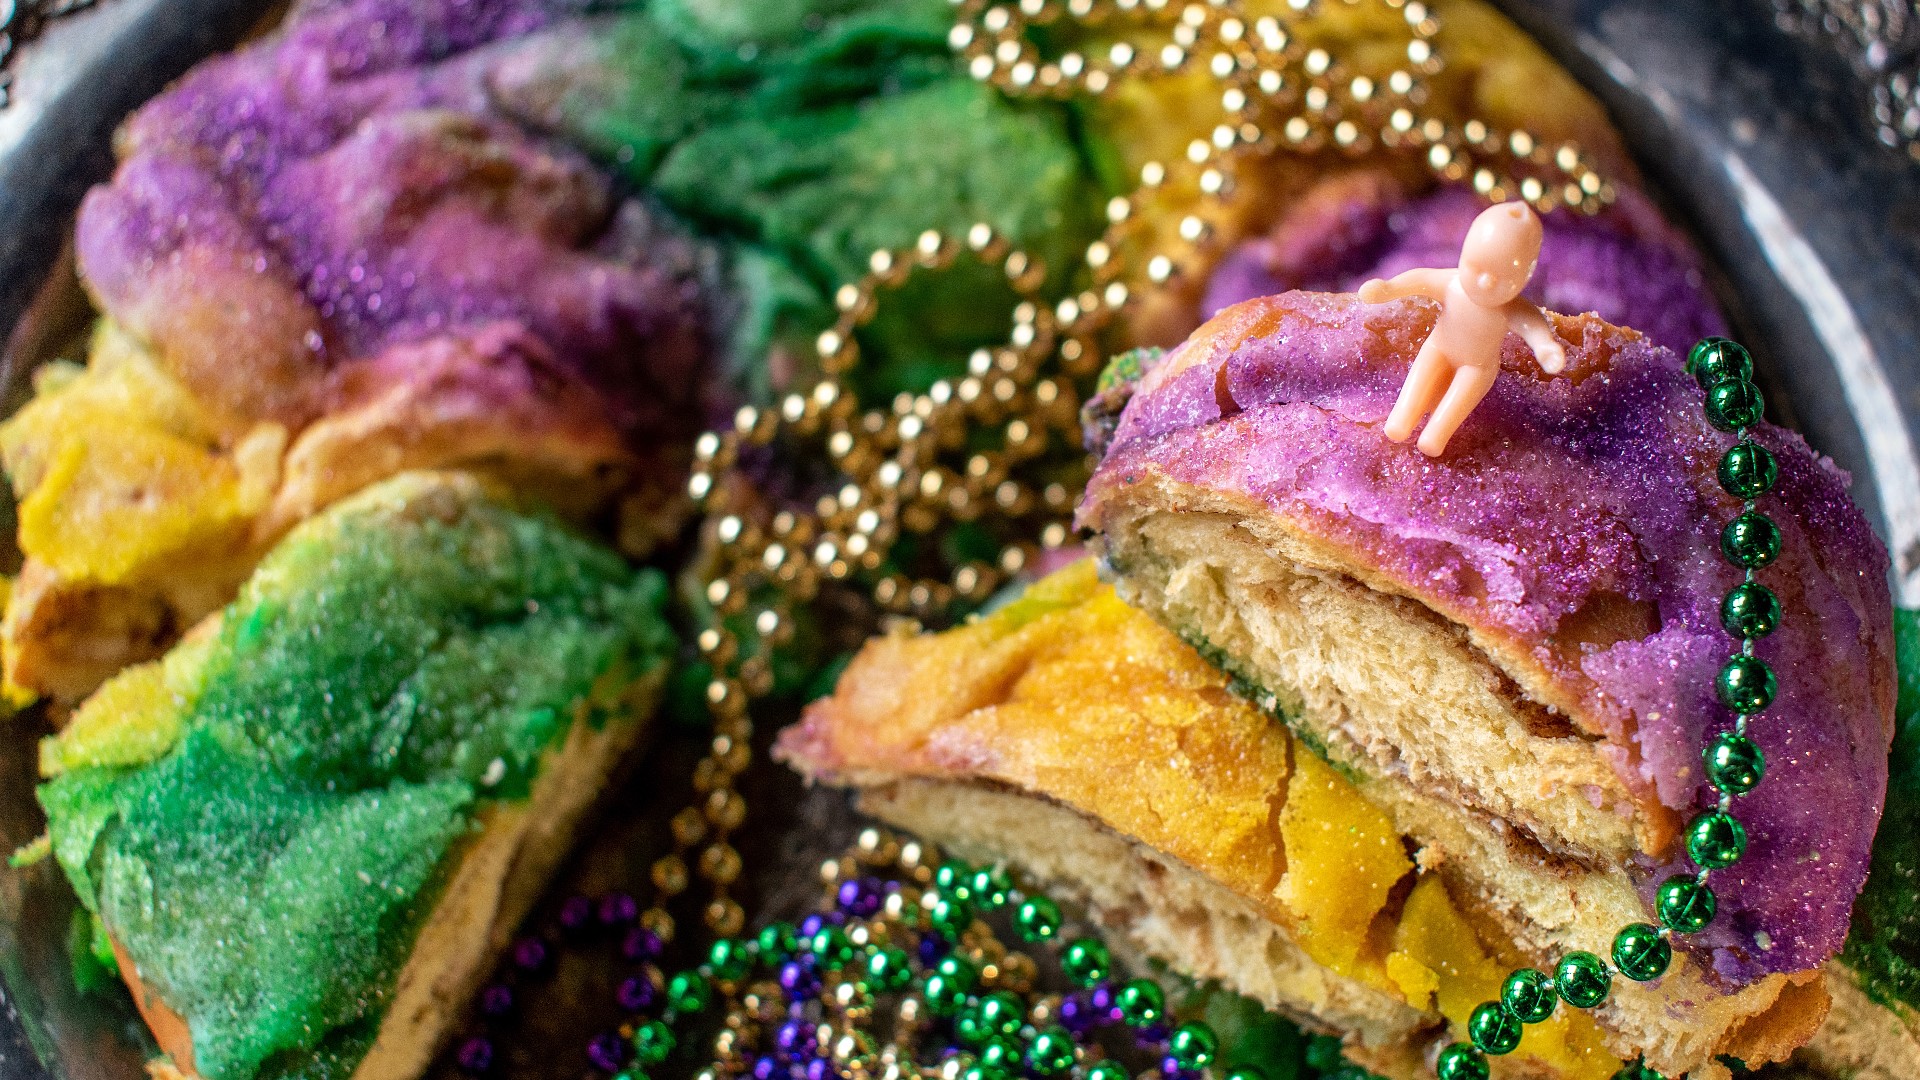 It wouldn't be Mardi Gras without king cake.